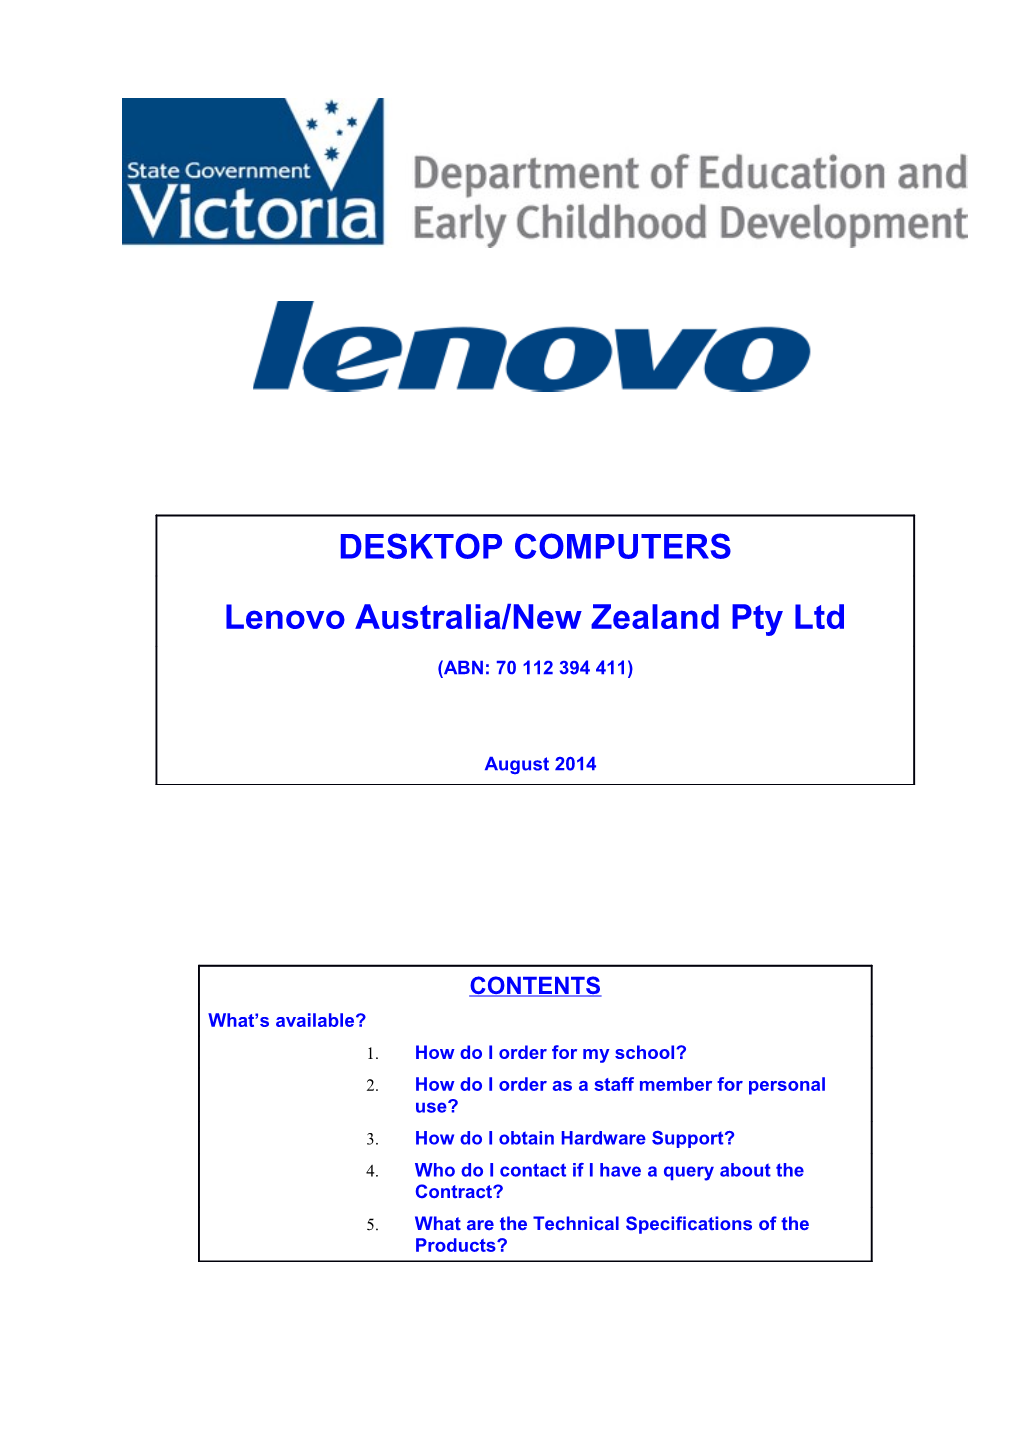 Lenovo Desktop Computer Pricing and Ordering